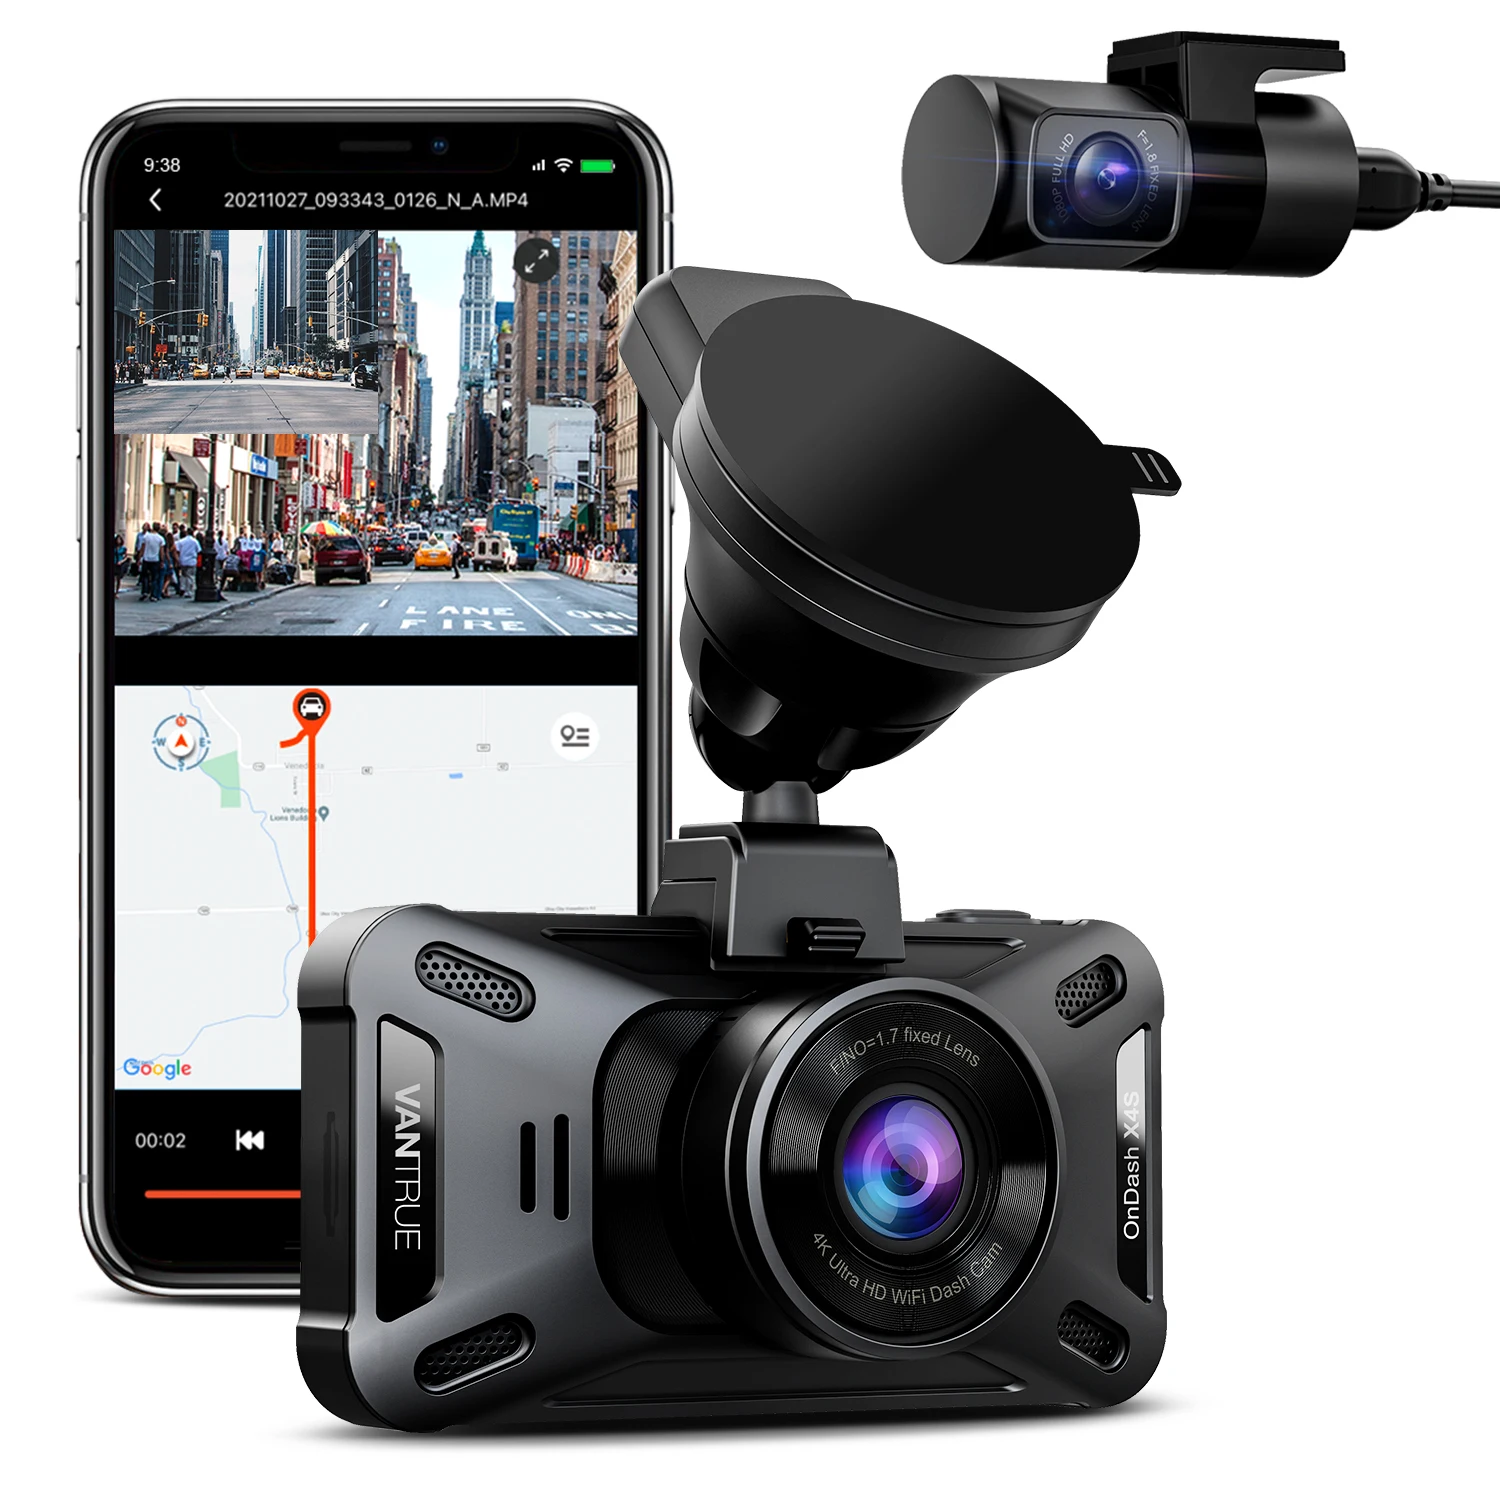 Vantrue N2s 4K Dash Cam, Dual 2.5K 1440p Dash Camera with GPS and Speed, IR Night Vision Front and Inside Uber Car Camera, 24/7 Recording Parking Mode